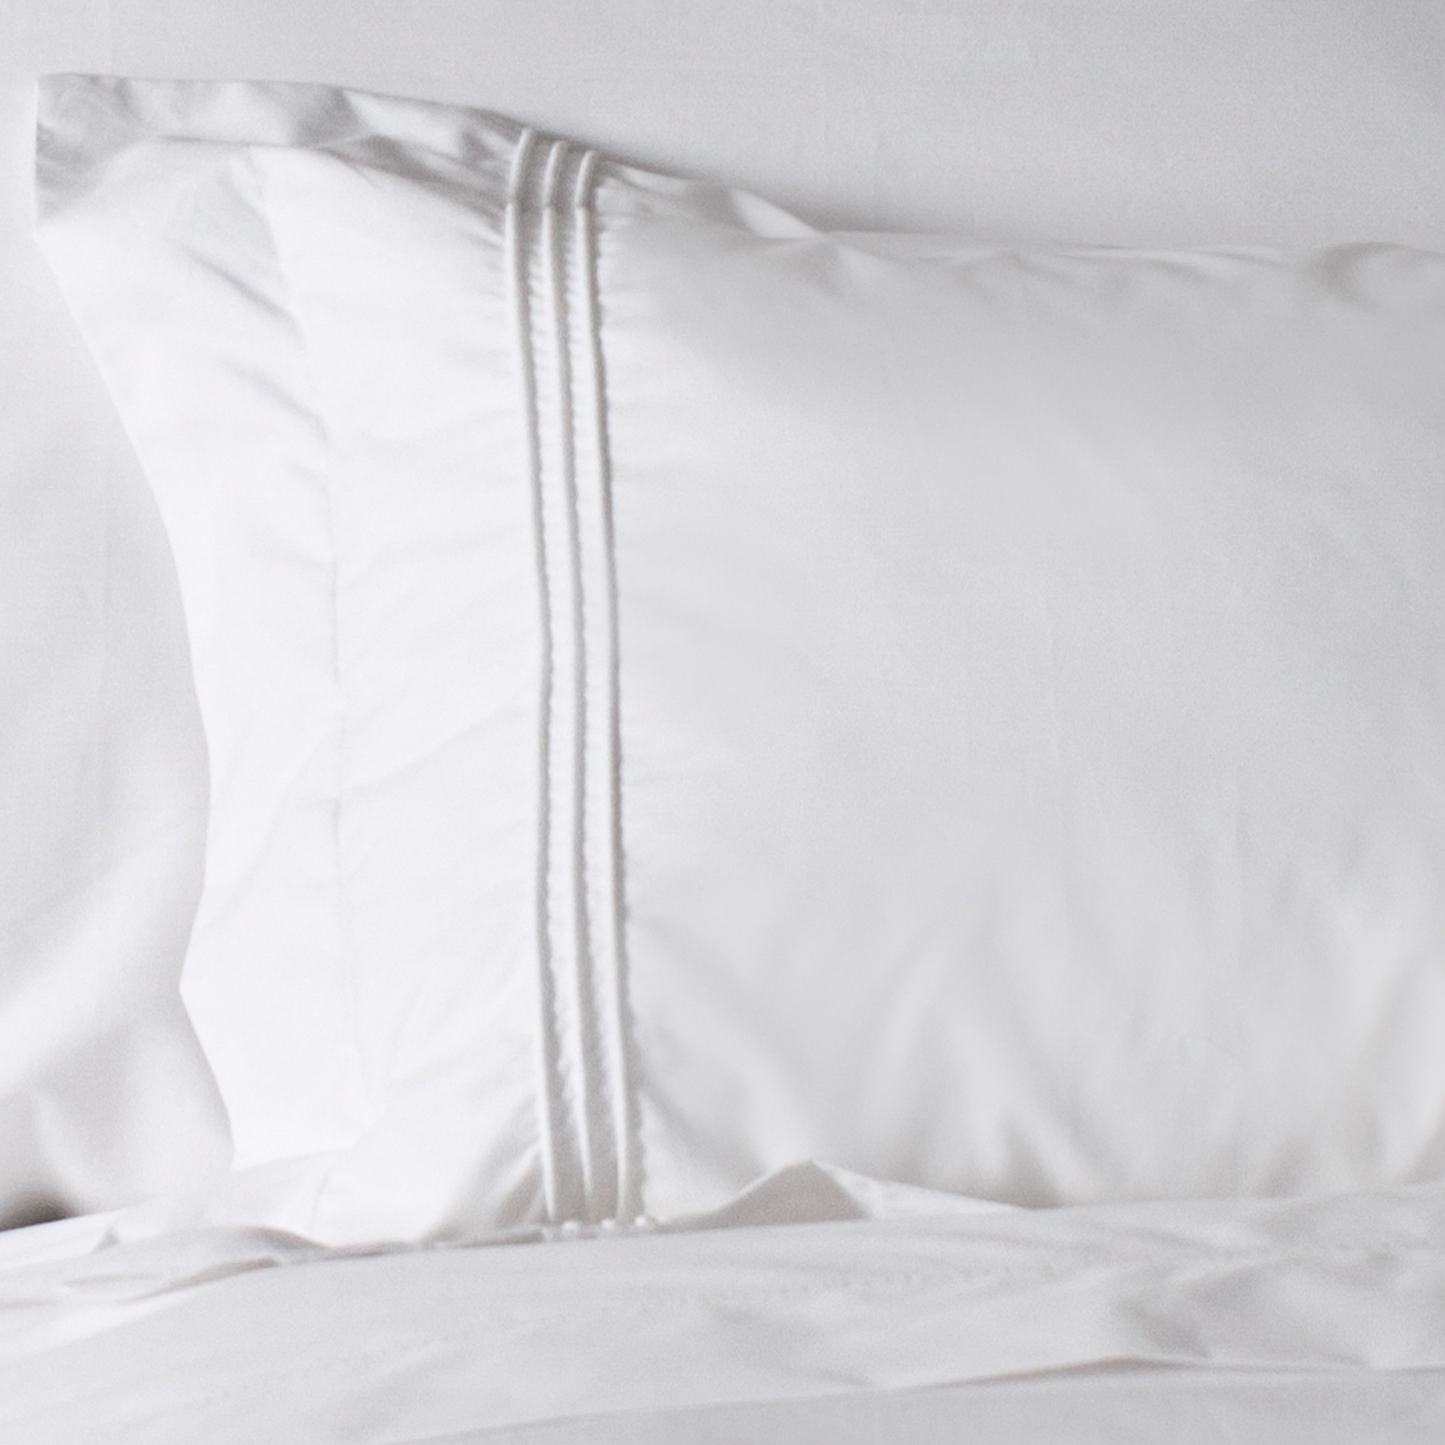 Giovani | Pillowcases and Shams | Percale